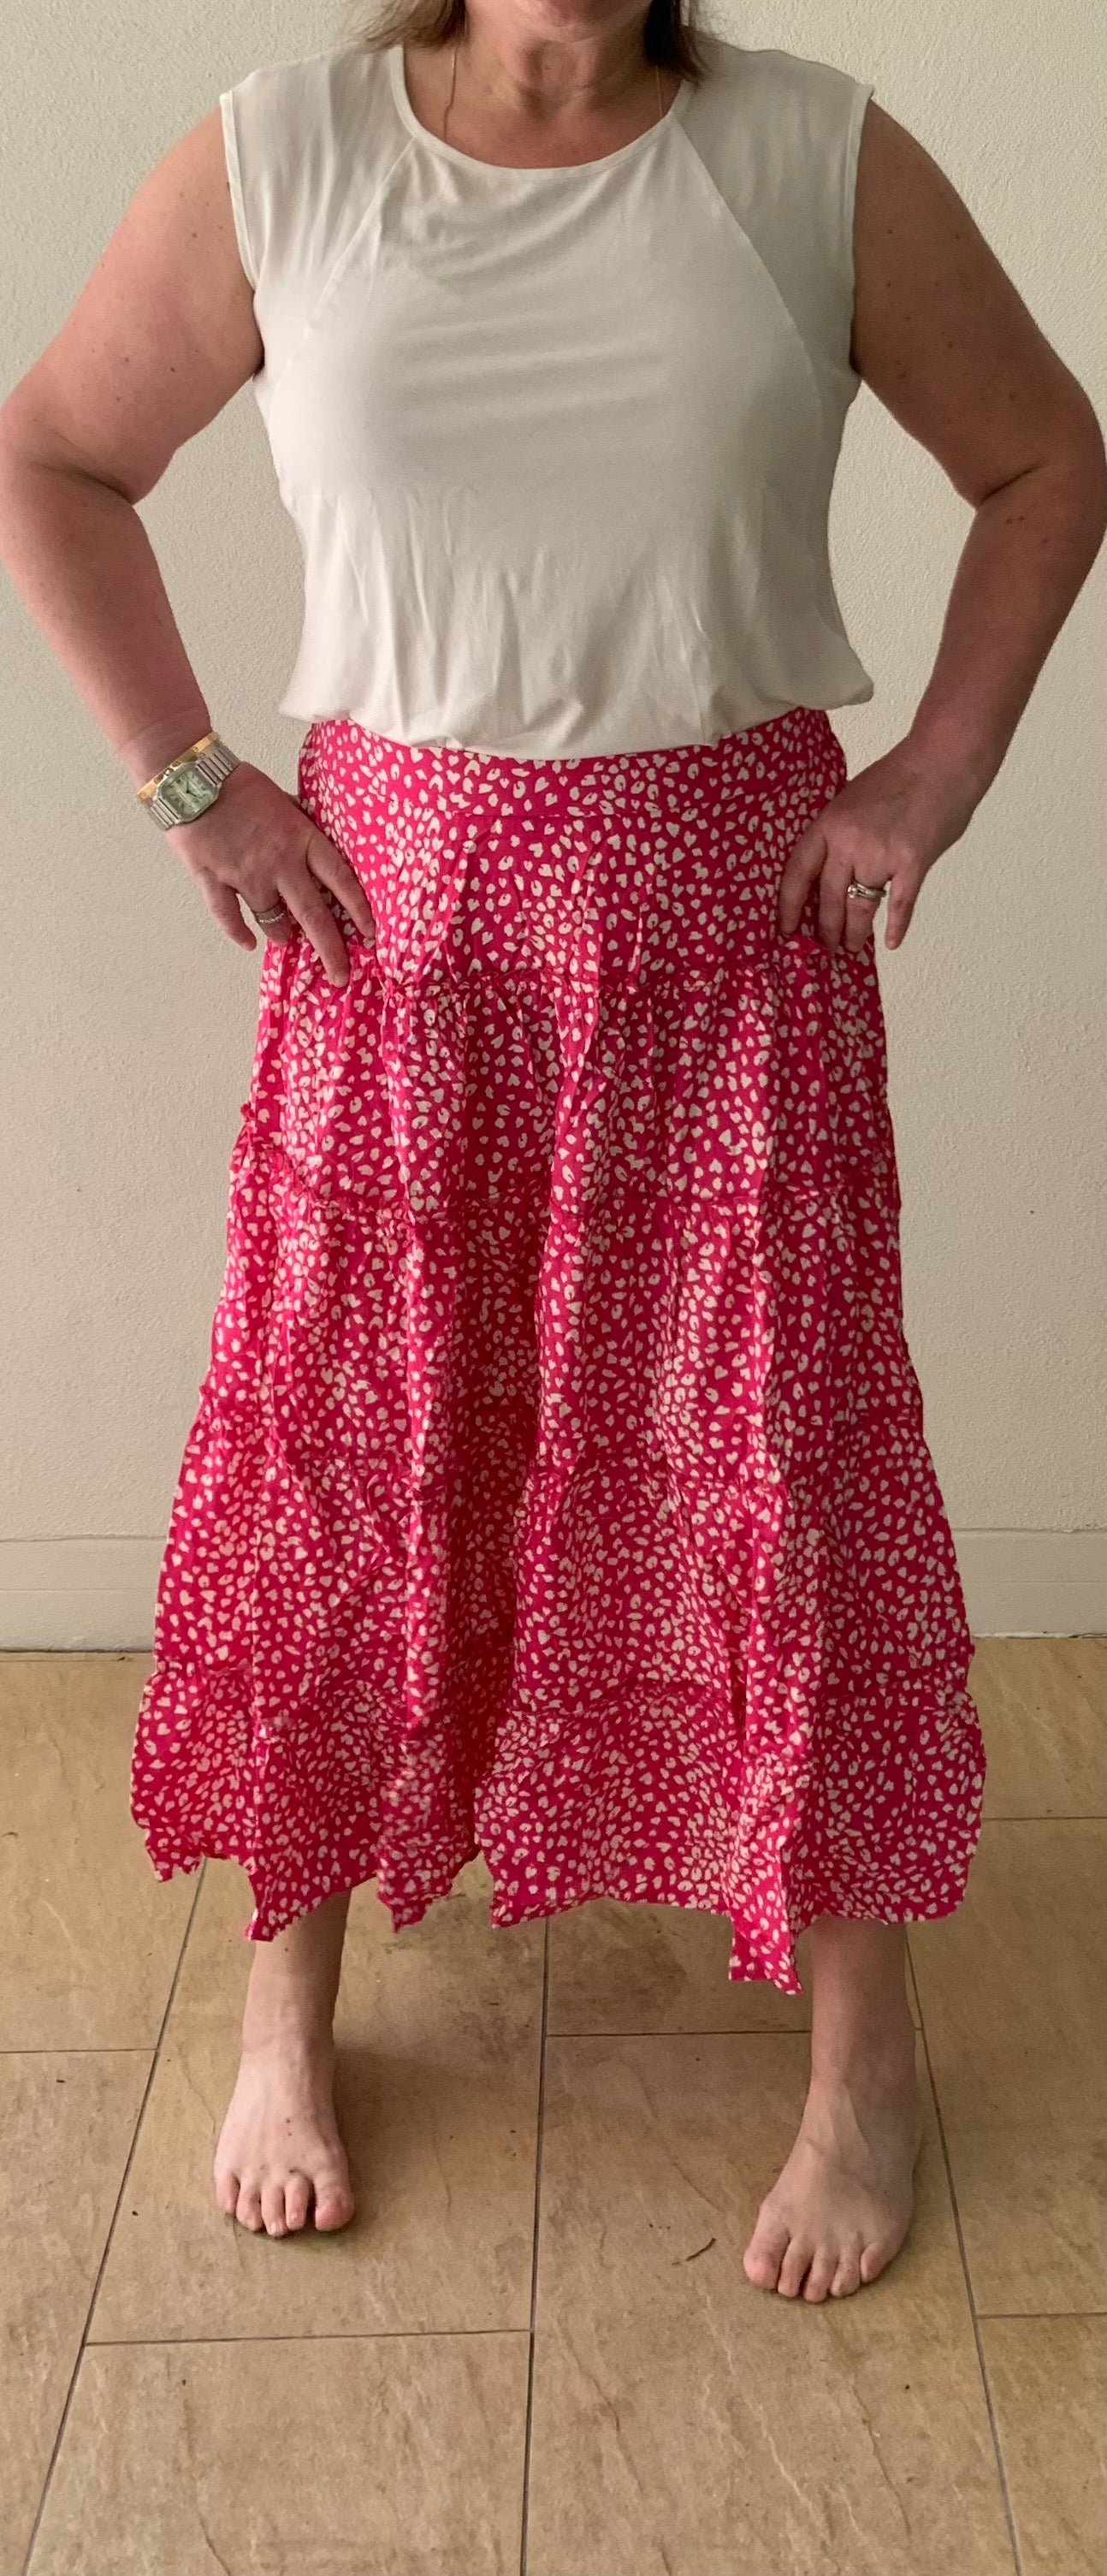 Silver Wishes Tiered Hot Pink & White Maxi Skirt with Elastic Waist